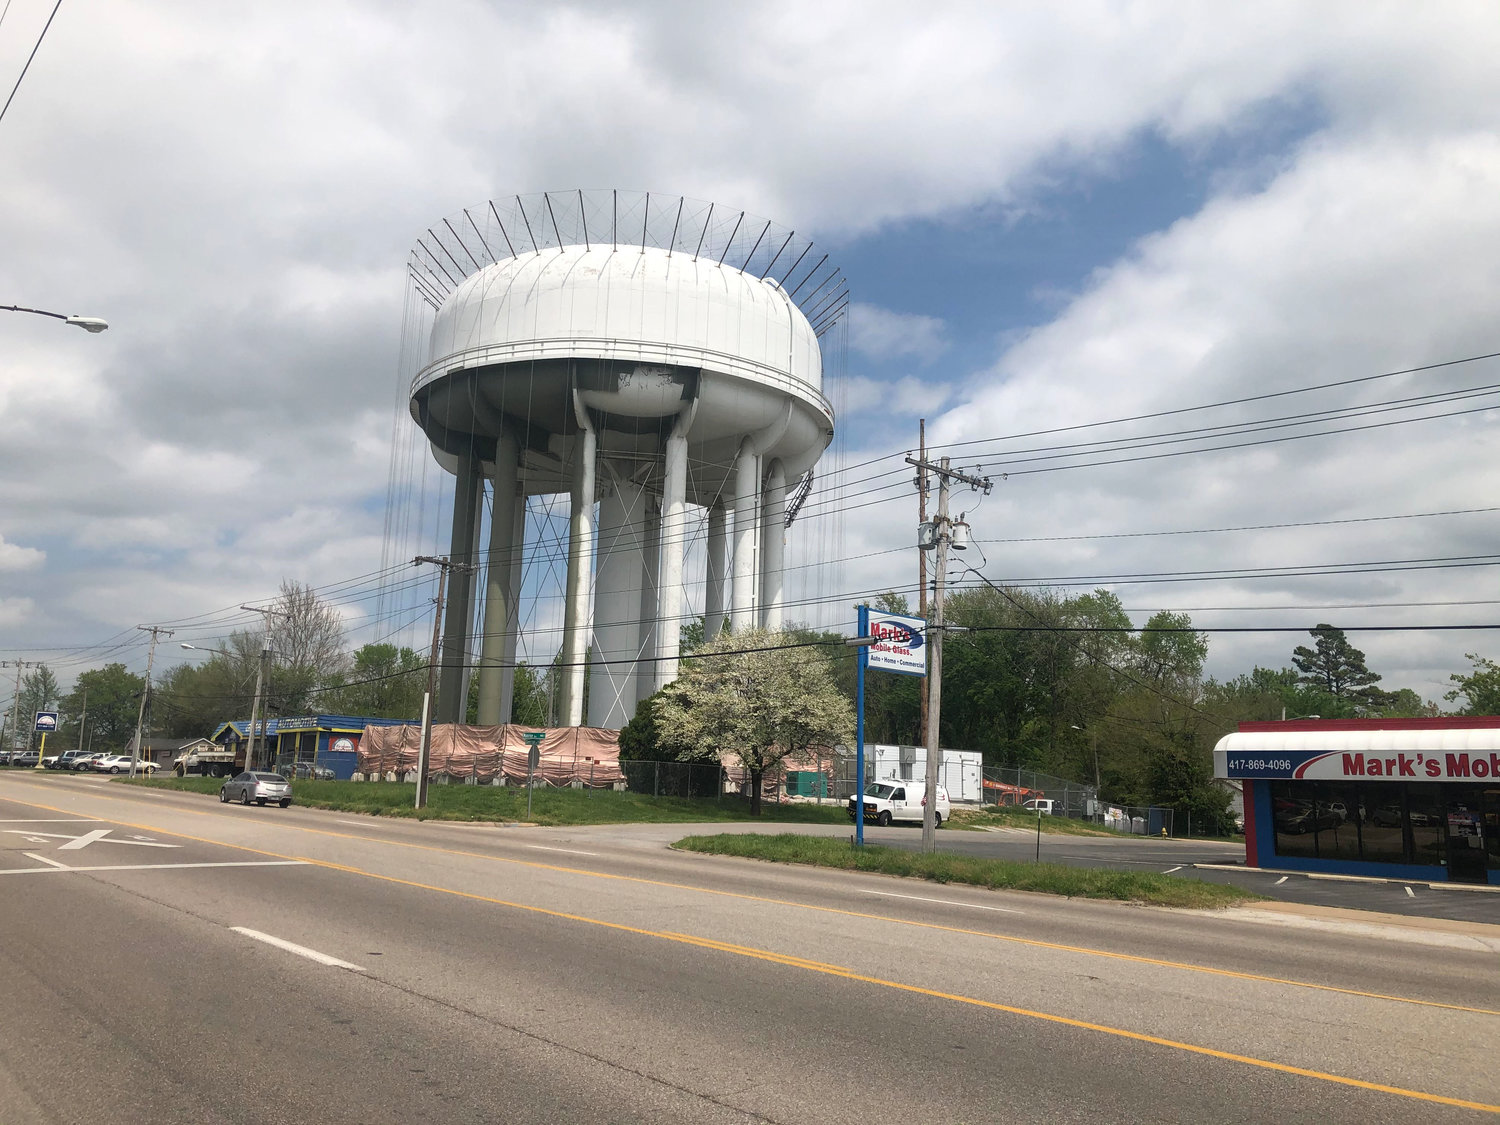 A metal apparatus on a Springfield water tower is being used in the repainting process.